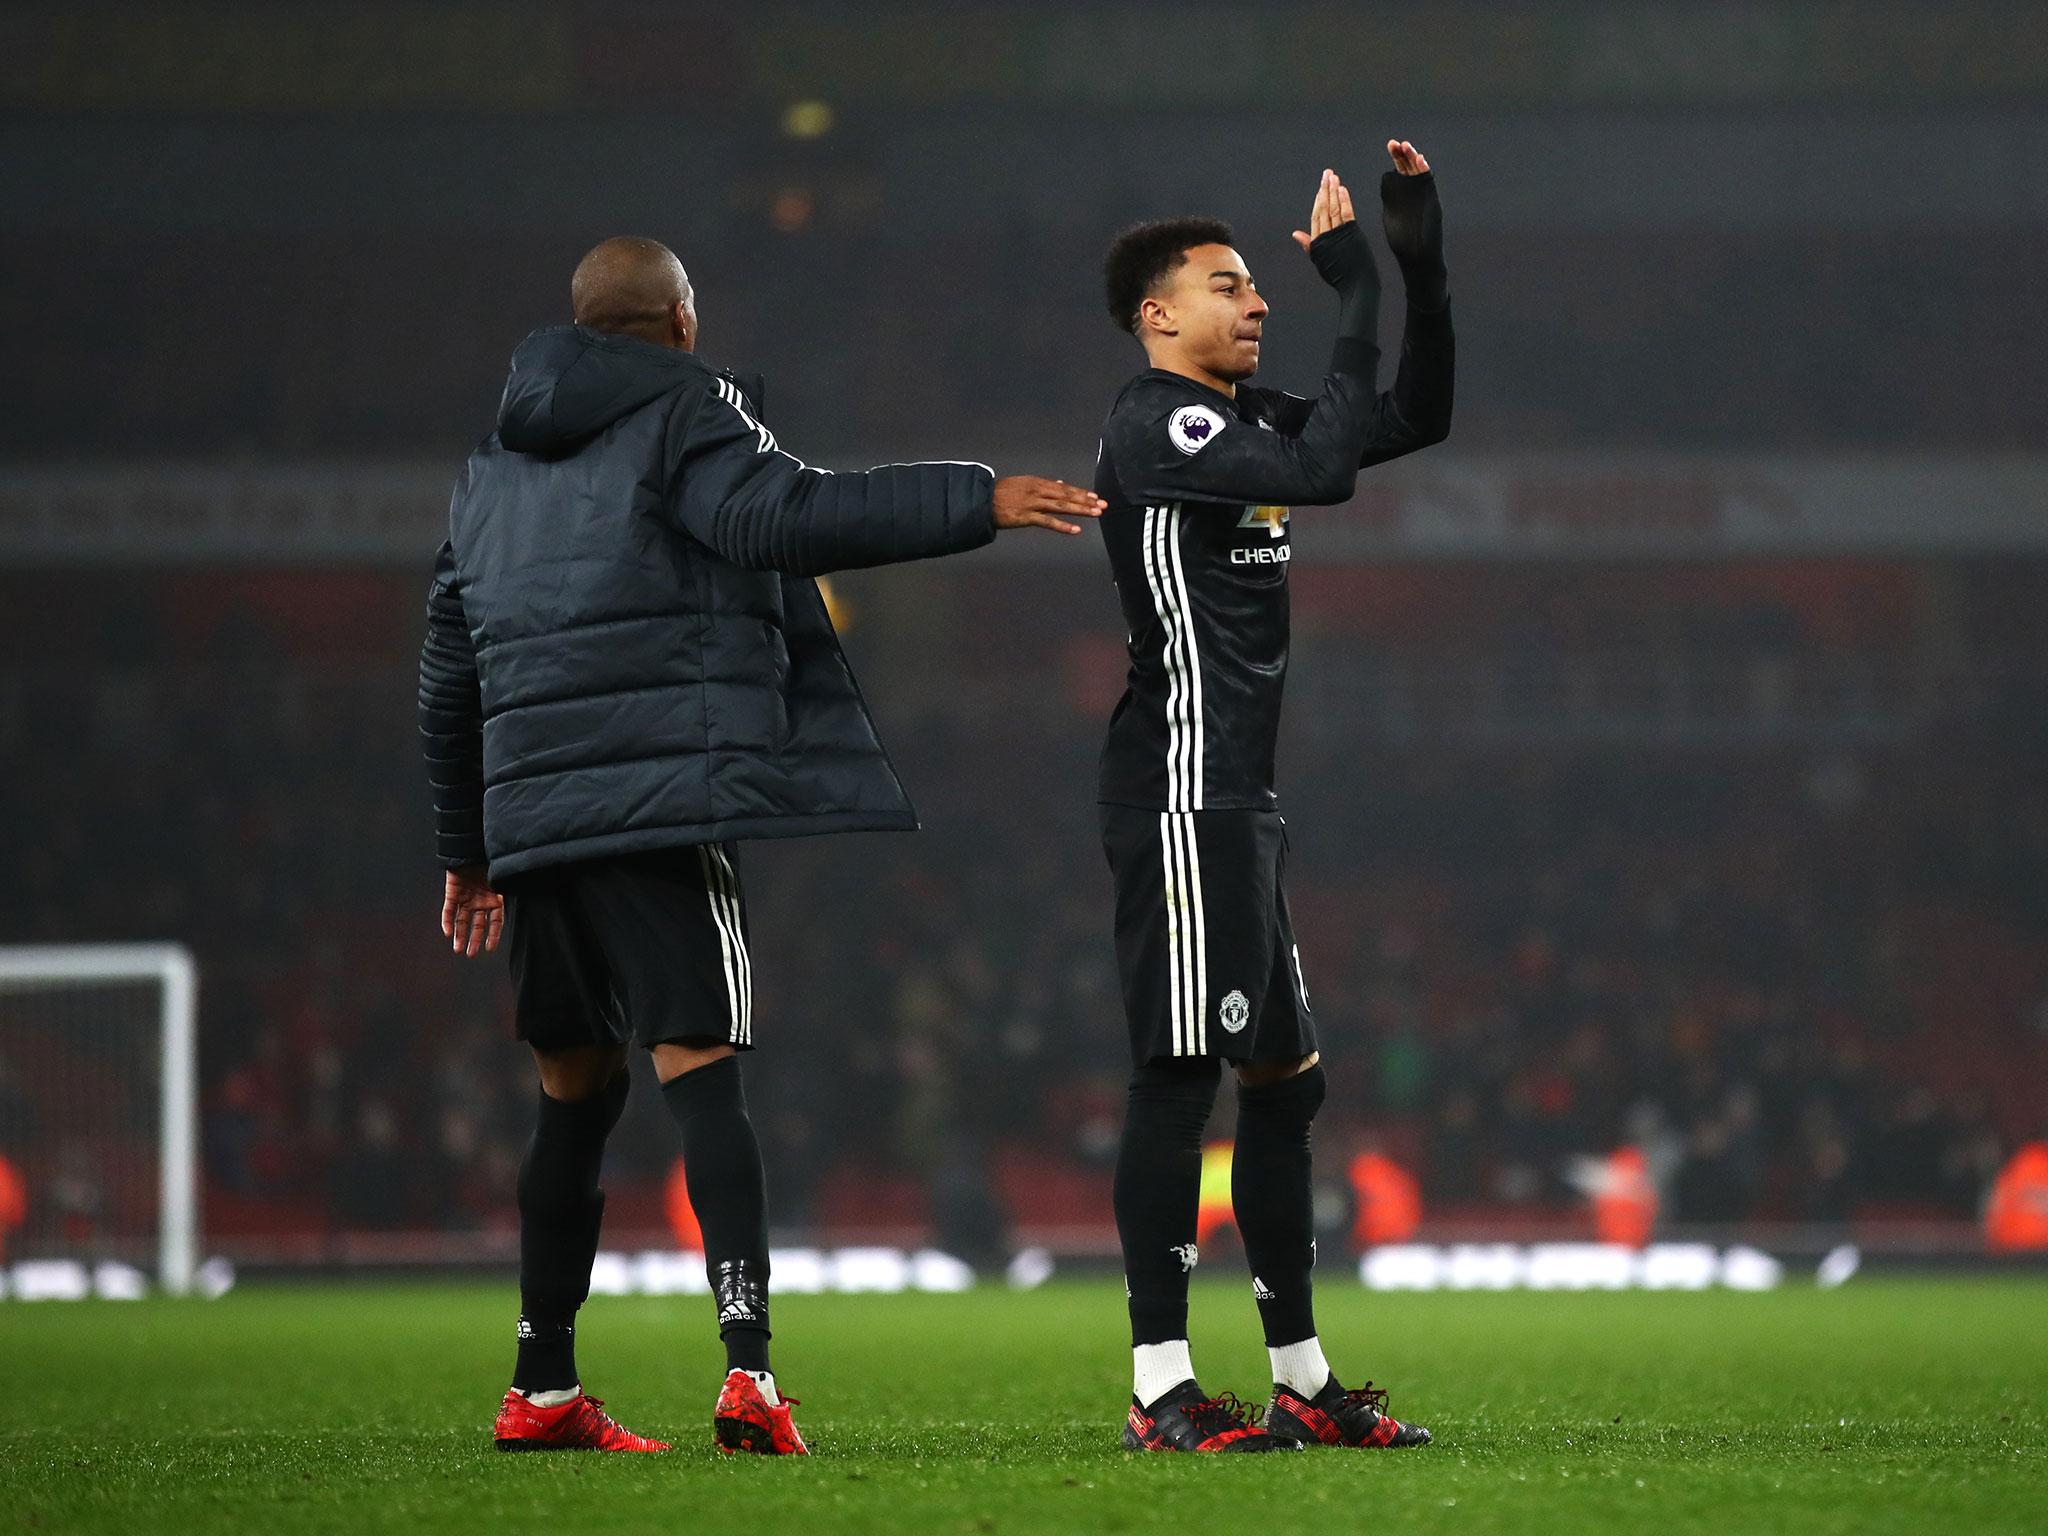 Jesse Lingard eventually settled United’s nervy night in north London